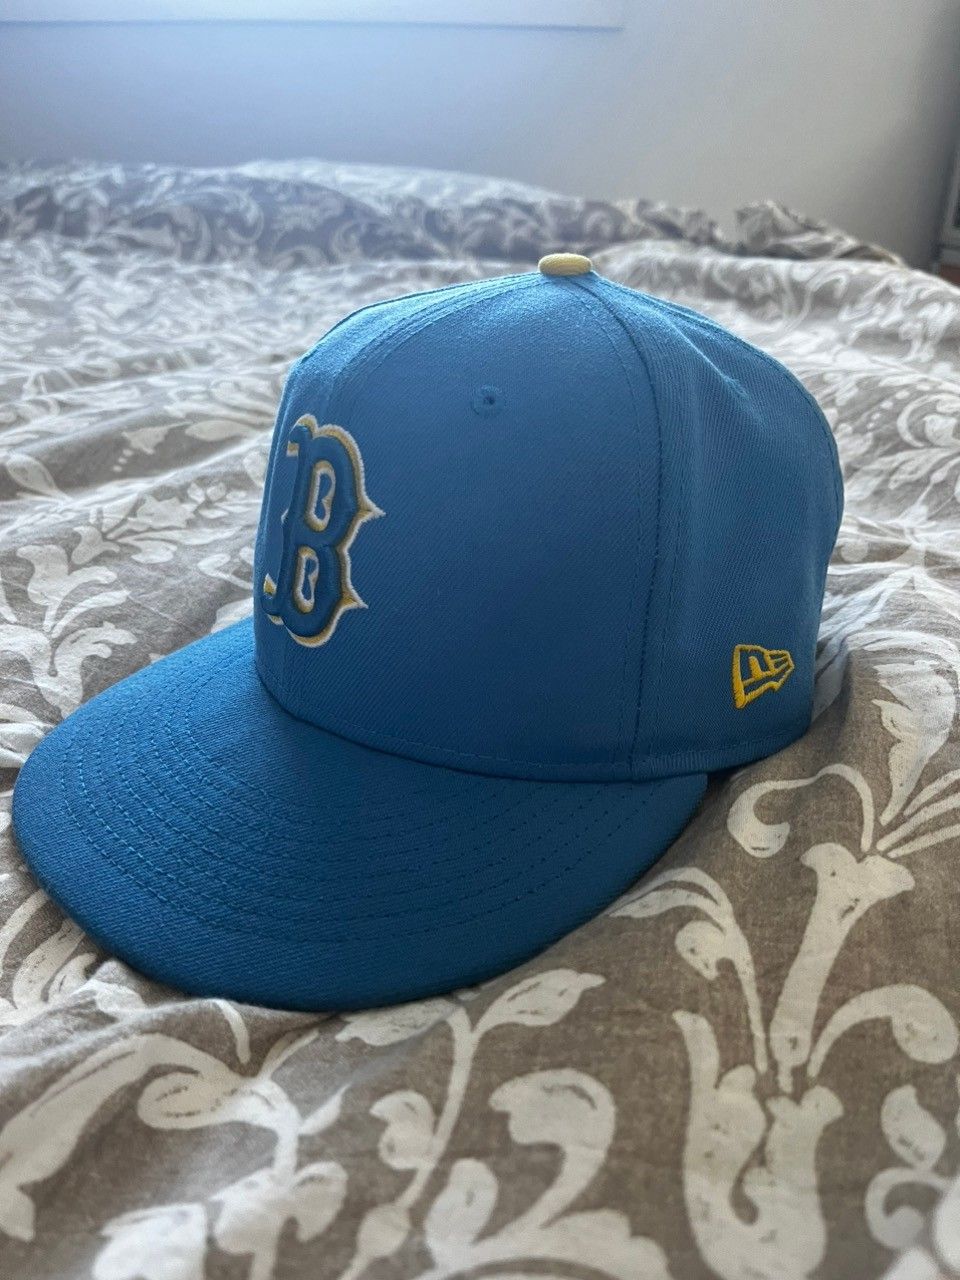 New era fitted